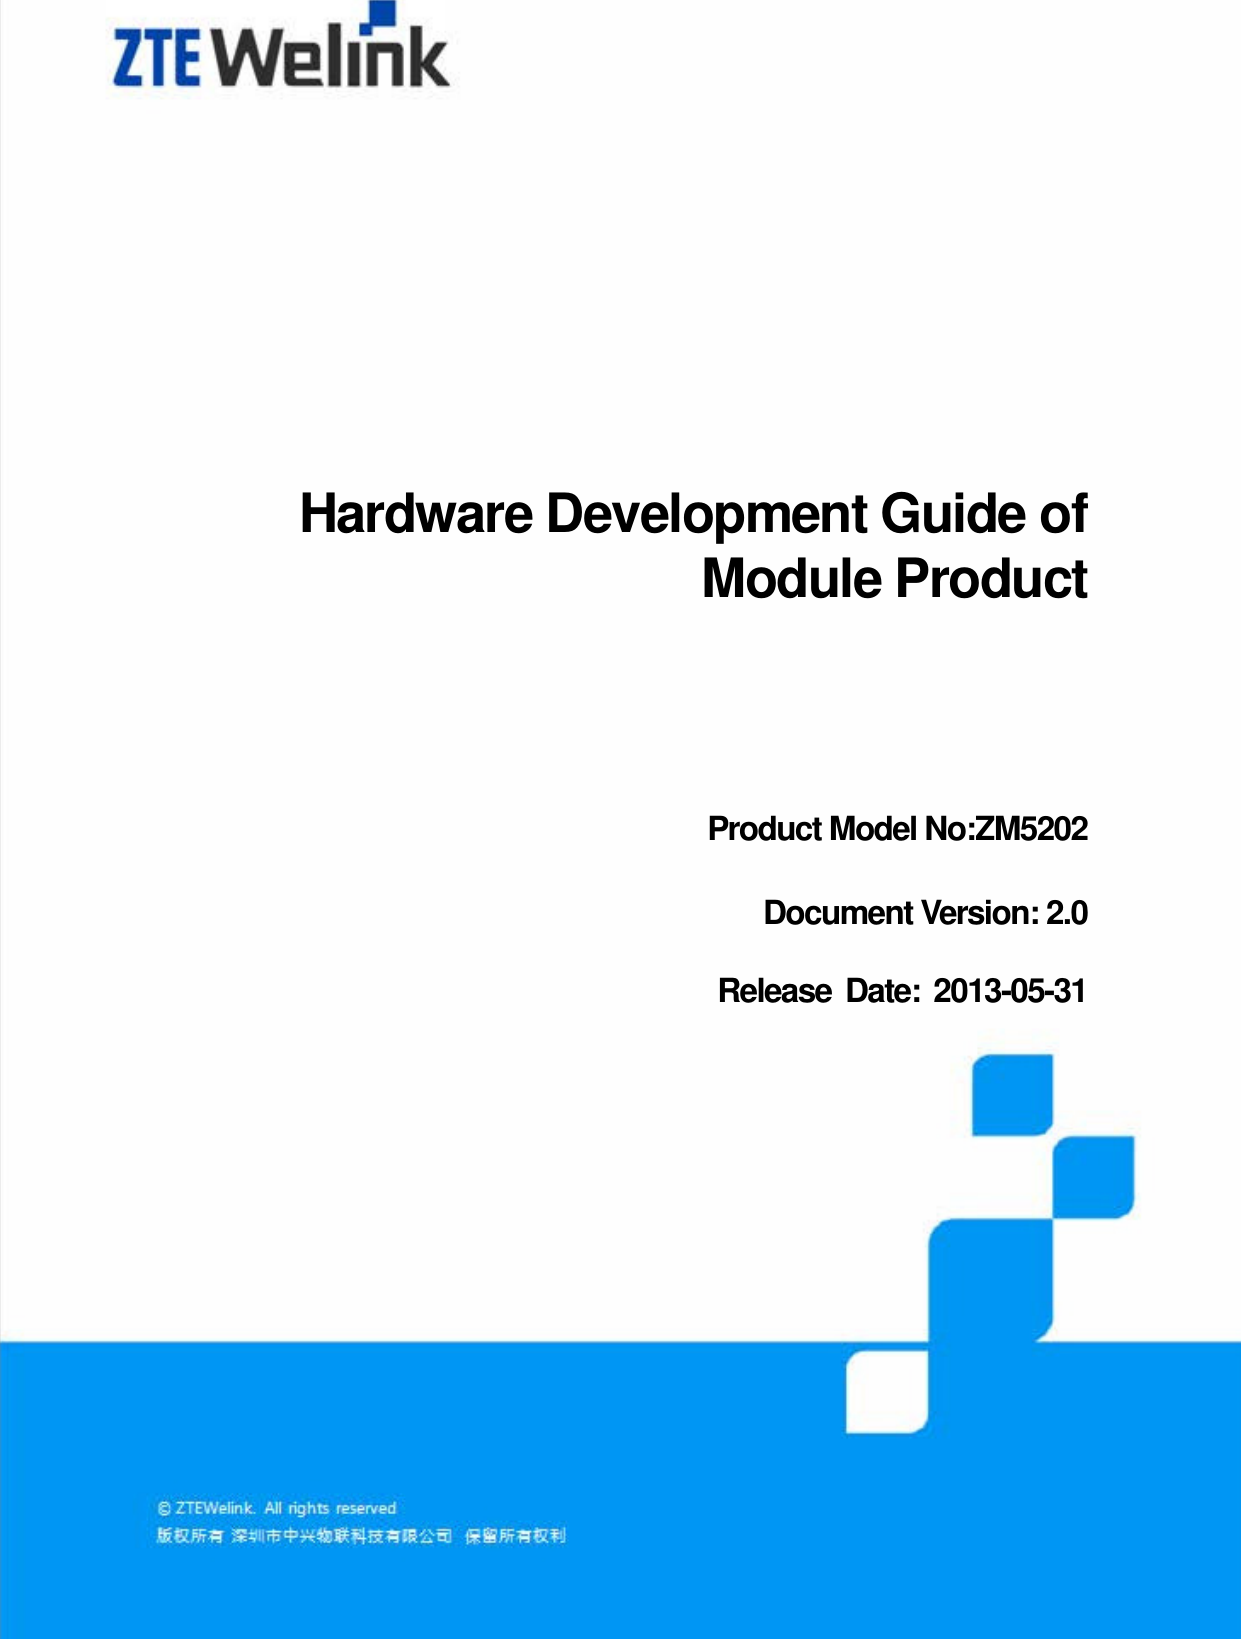                                                                 Hardware  Development  Guide  of  Module  Product All Rights reserved, No Spreading abroad without Permission of ZTEWelink  I   Hardware Development Guide of Module Product   Product Model No:ZM5202 Document Version: 2.0 Release Date: 2013-05-31  